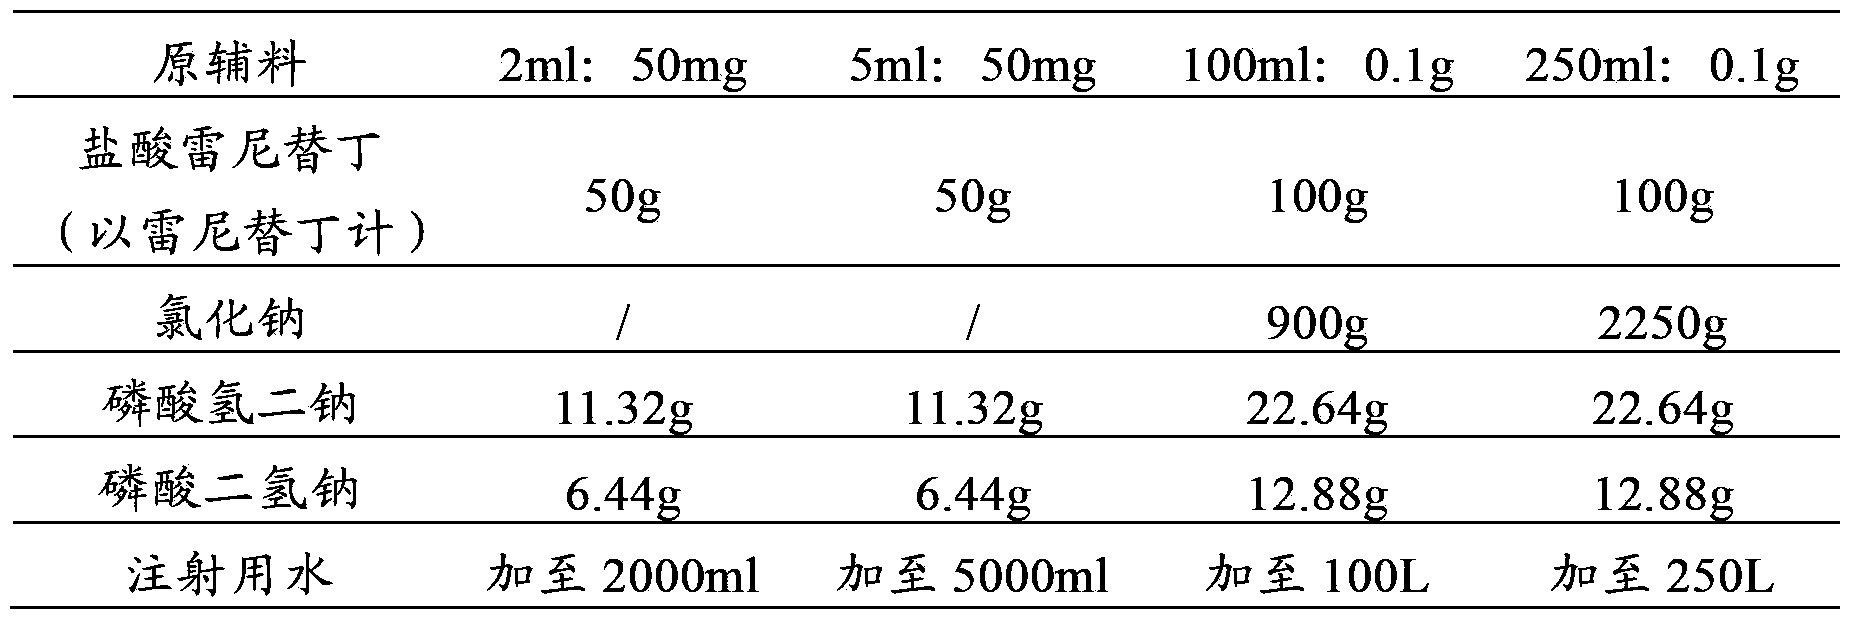 Pharmaceutical composition of paclitaxel and ranitidine hydrochloride